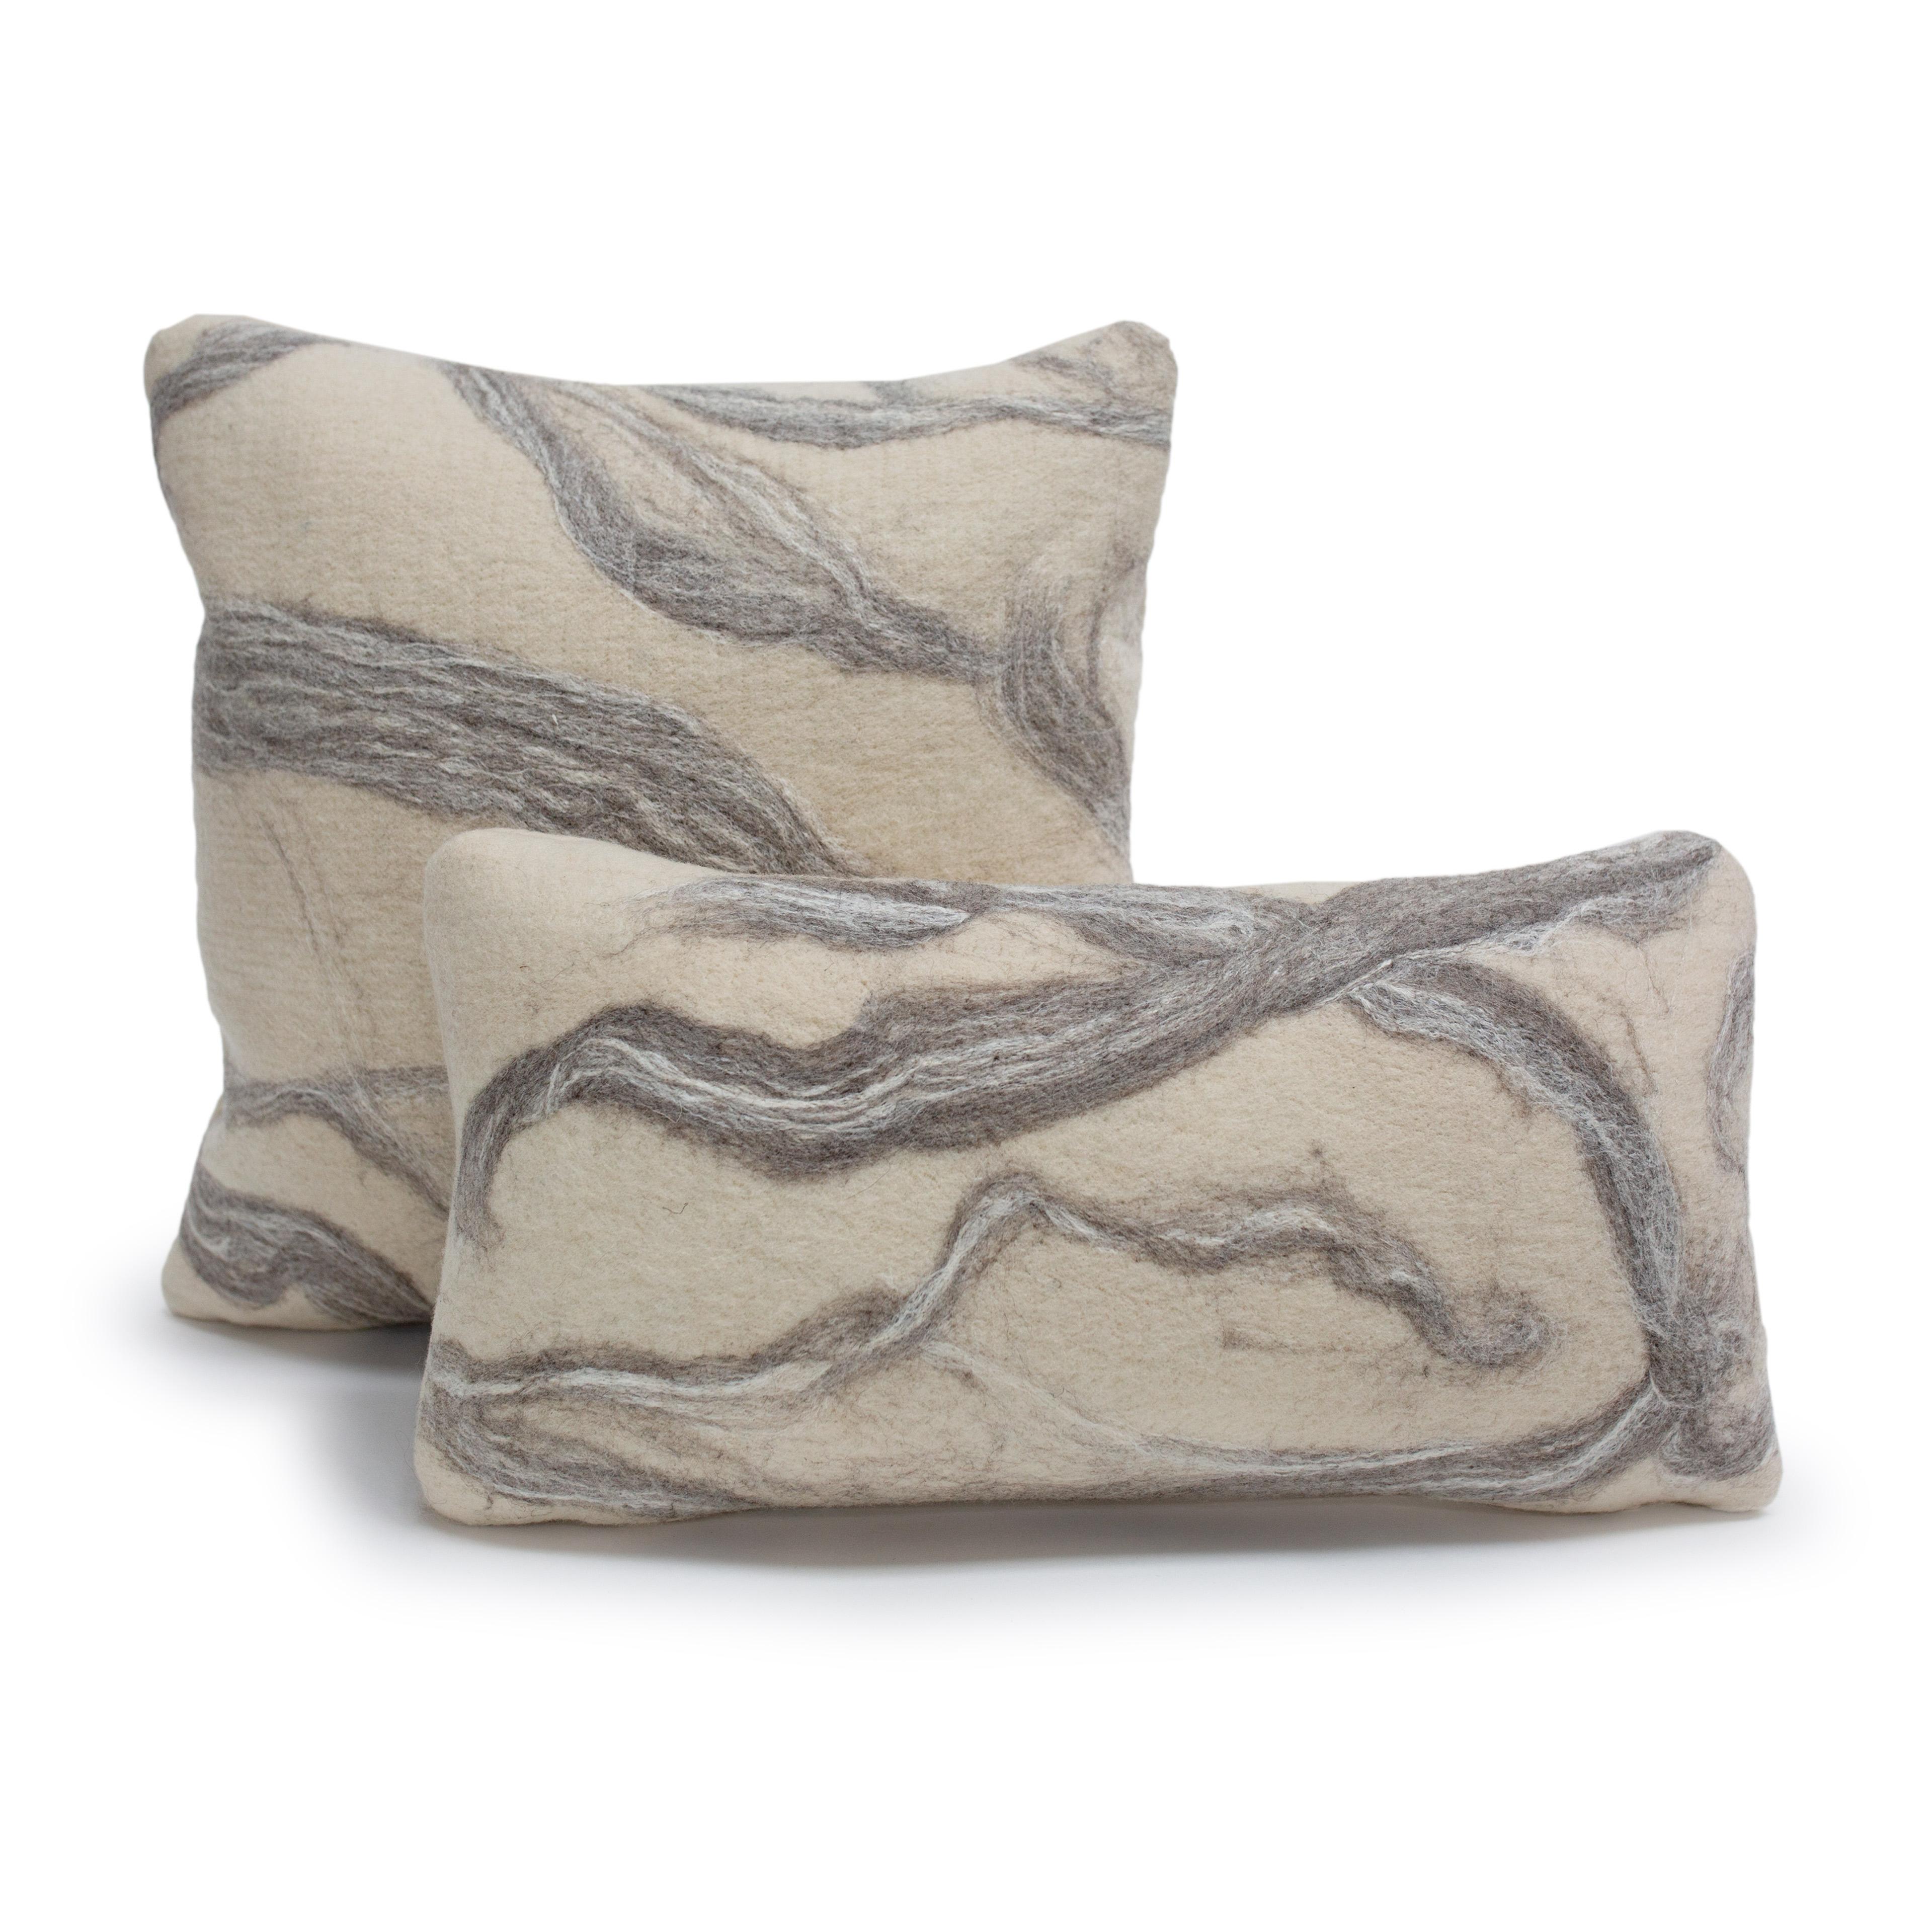 Hand-Crafted Felted Wool Pillow with Grey Ribbon by JG Switzer For Sale